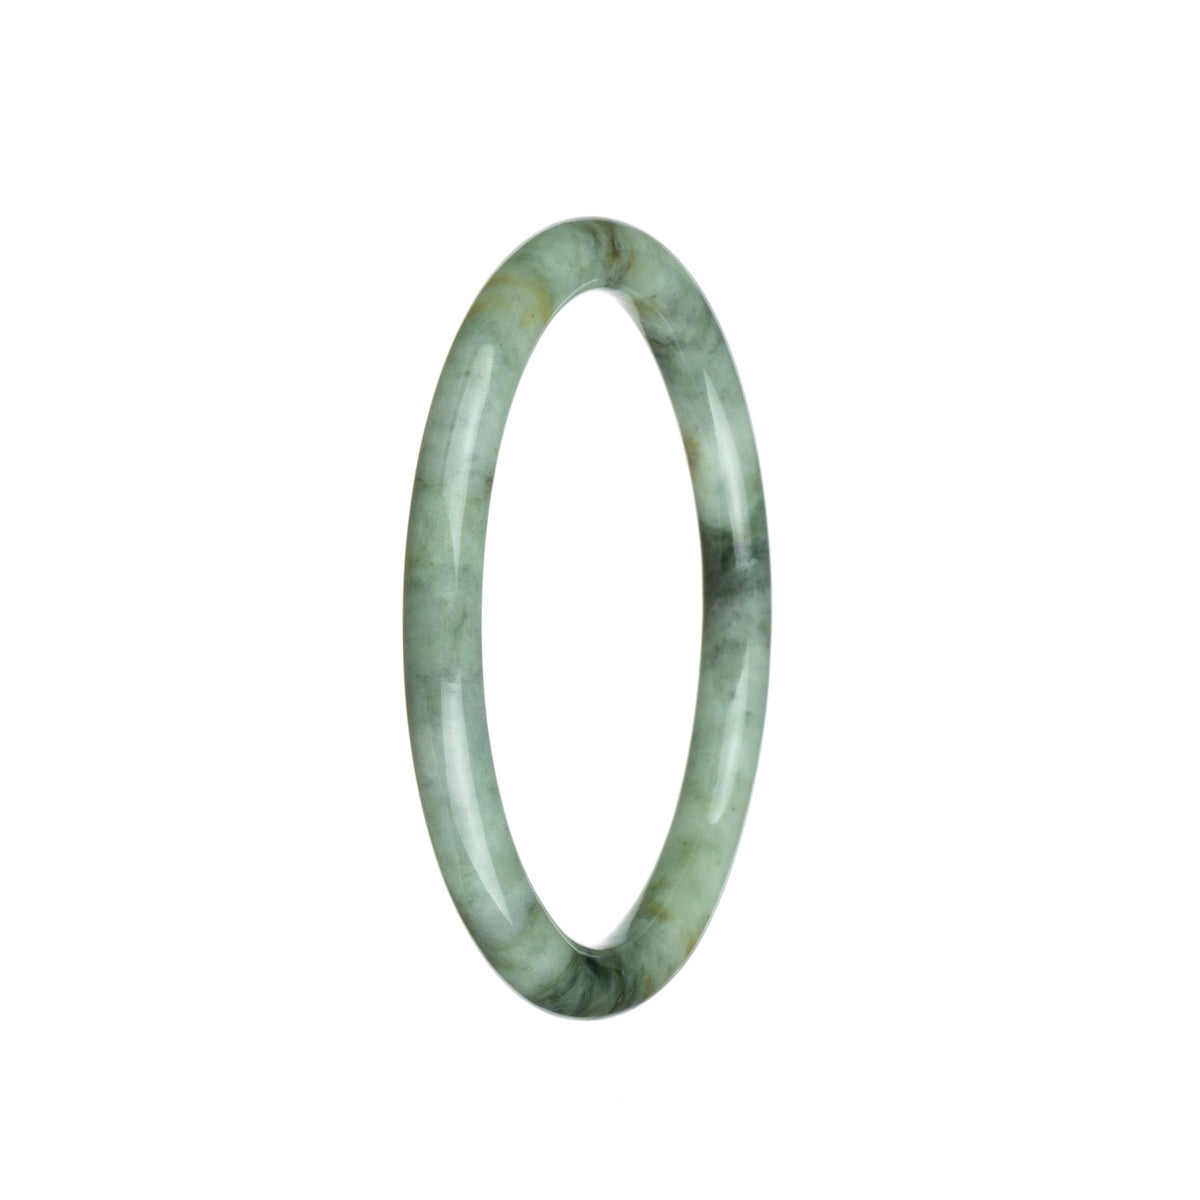 A small, round greyish white and grey patterned jadeite jade bangle bracelet measuring 61mm in size.